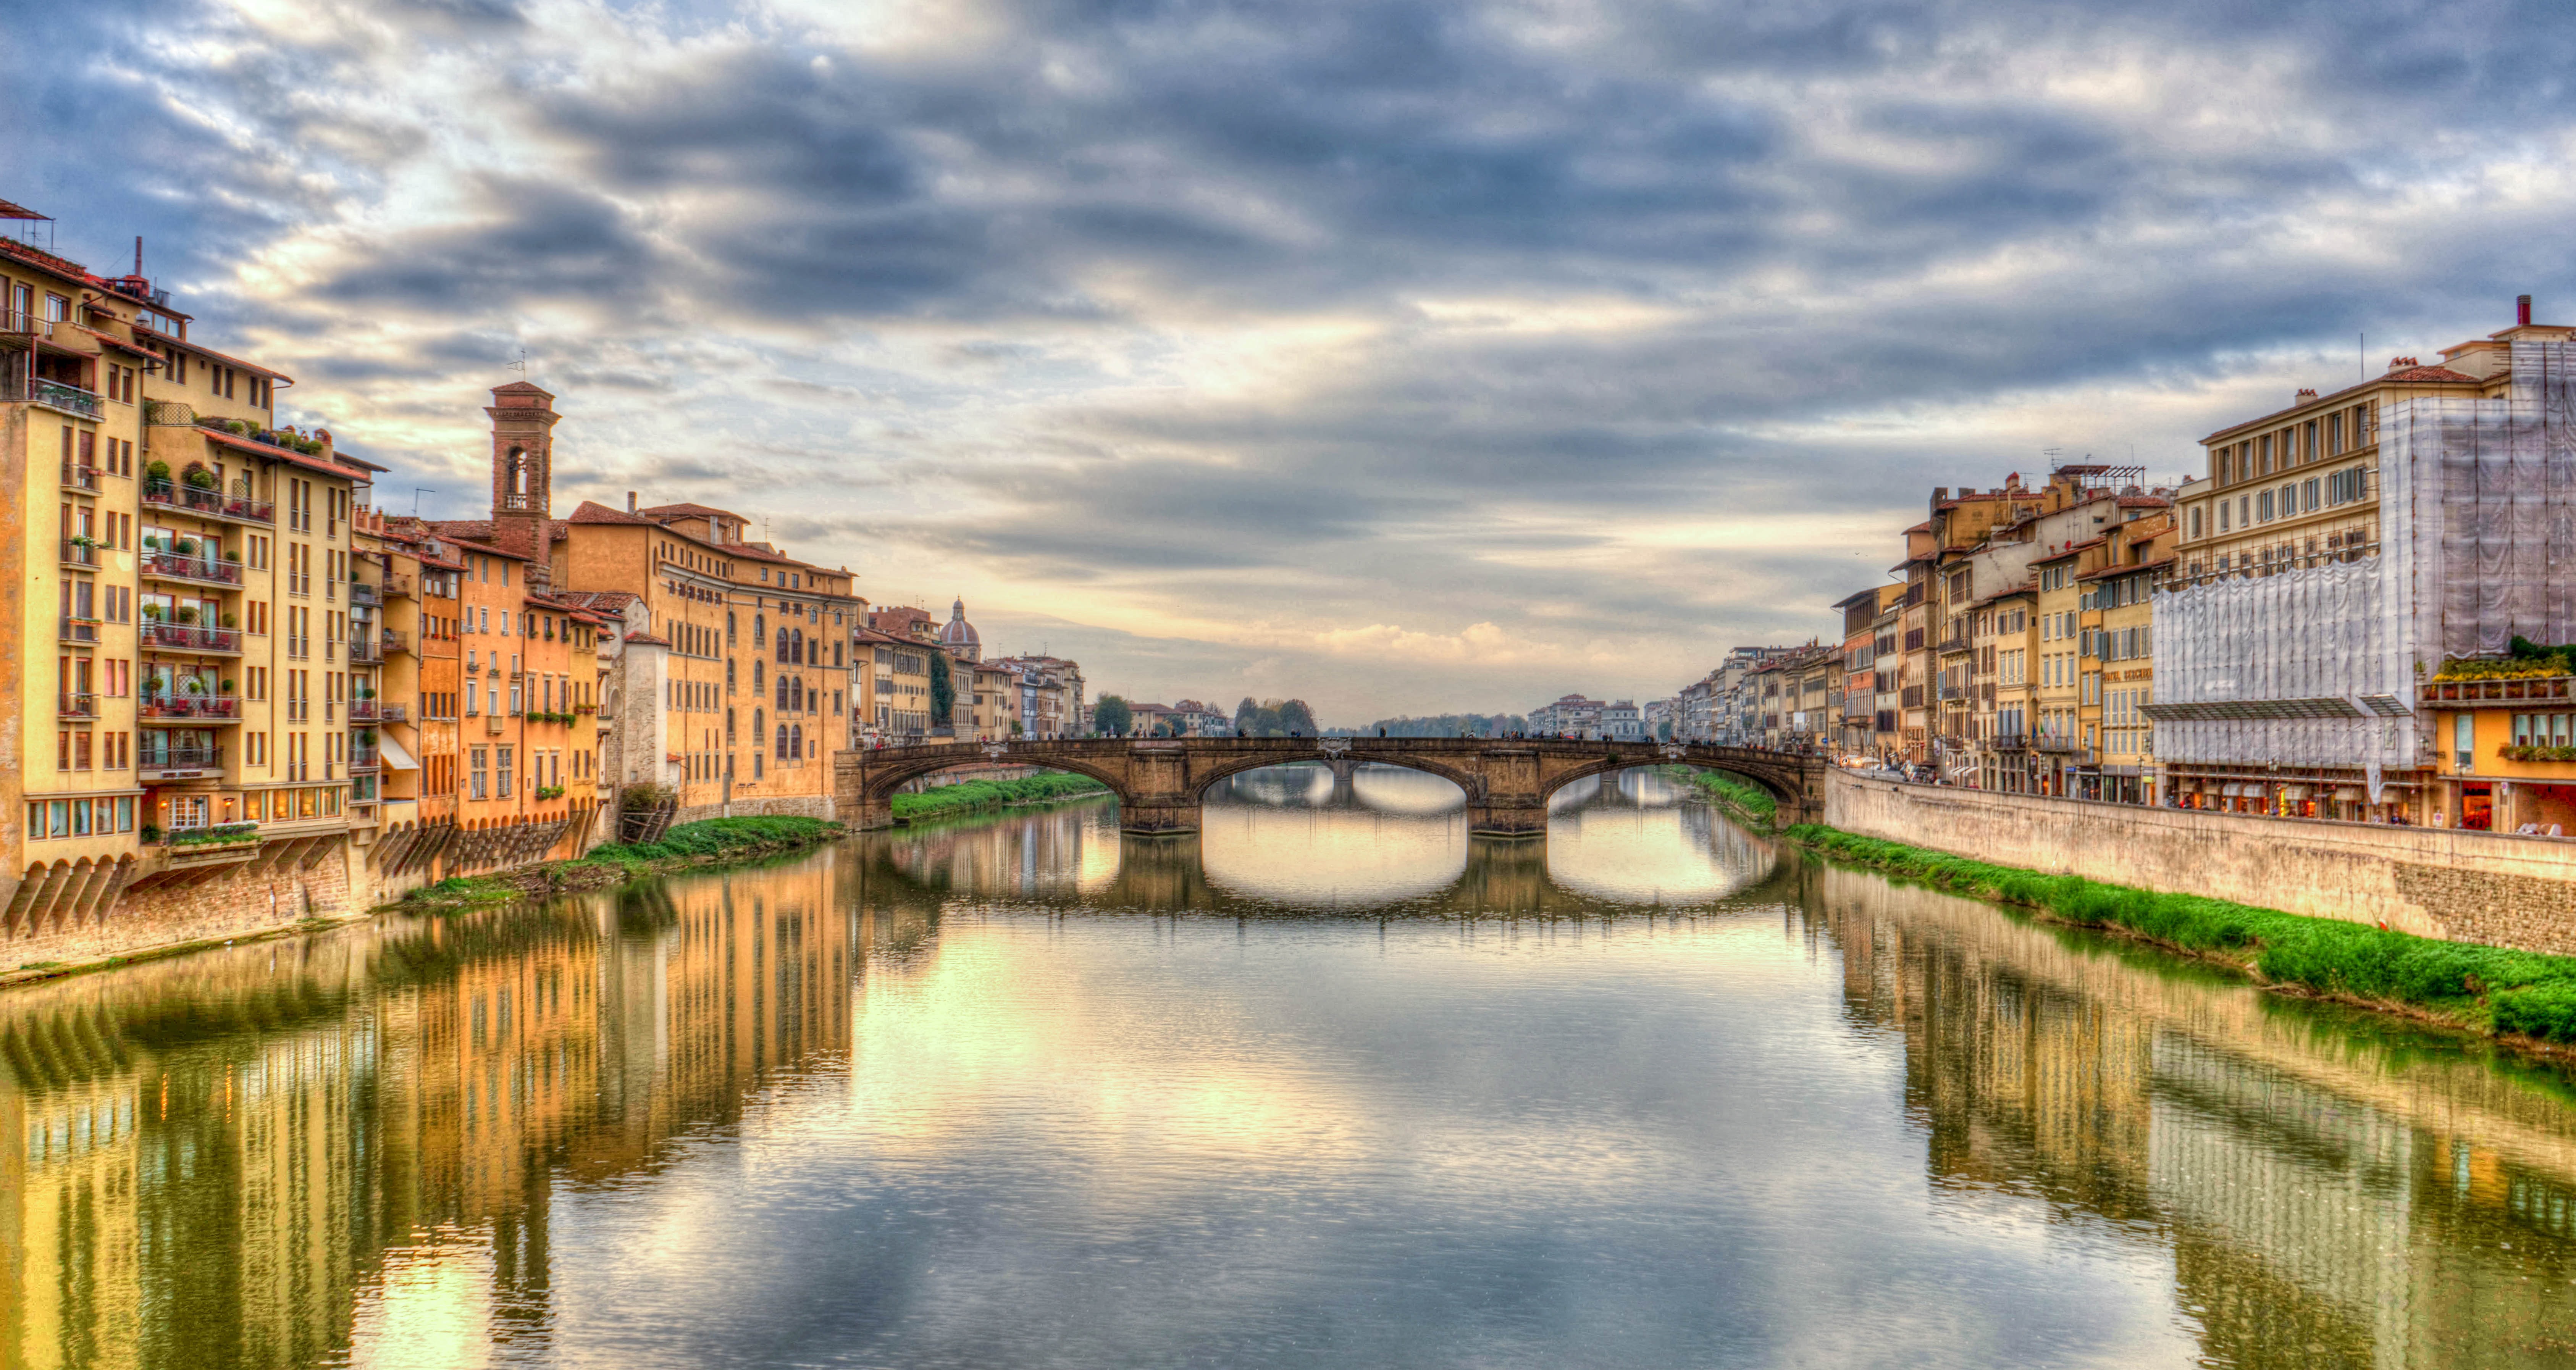 Florence Italy Bridge Wallpaper Hd City 4k Wallpapers Images And